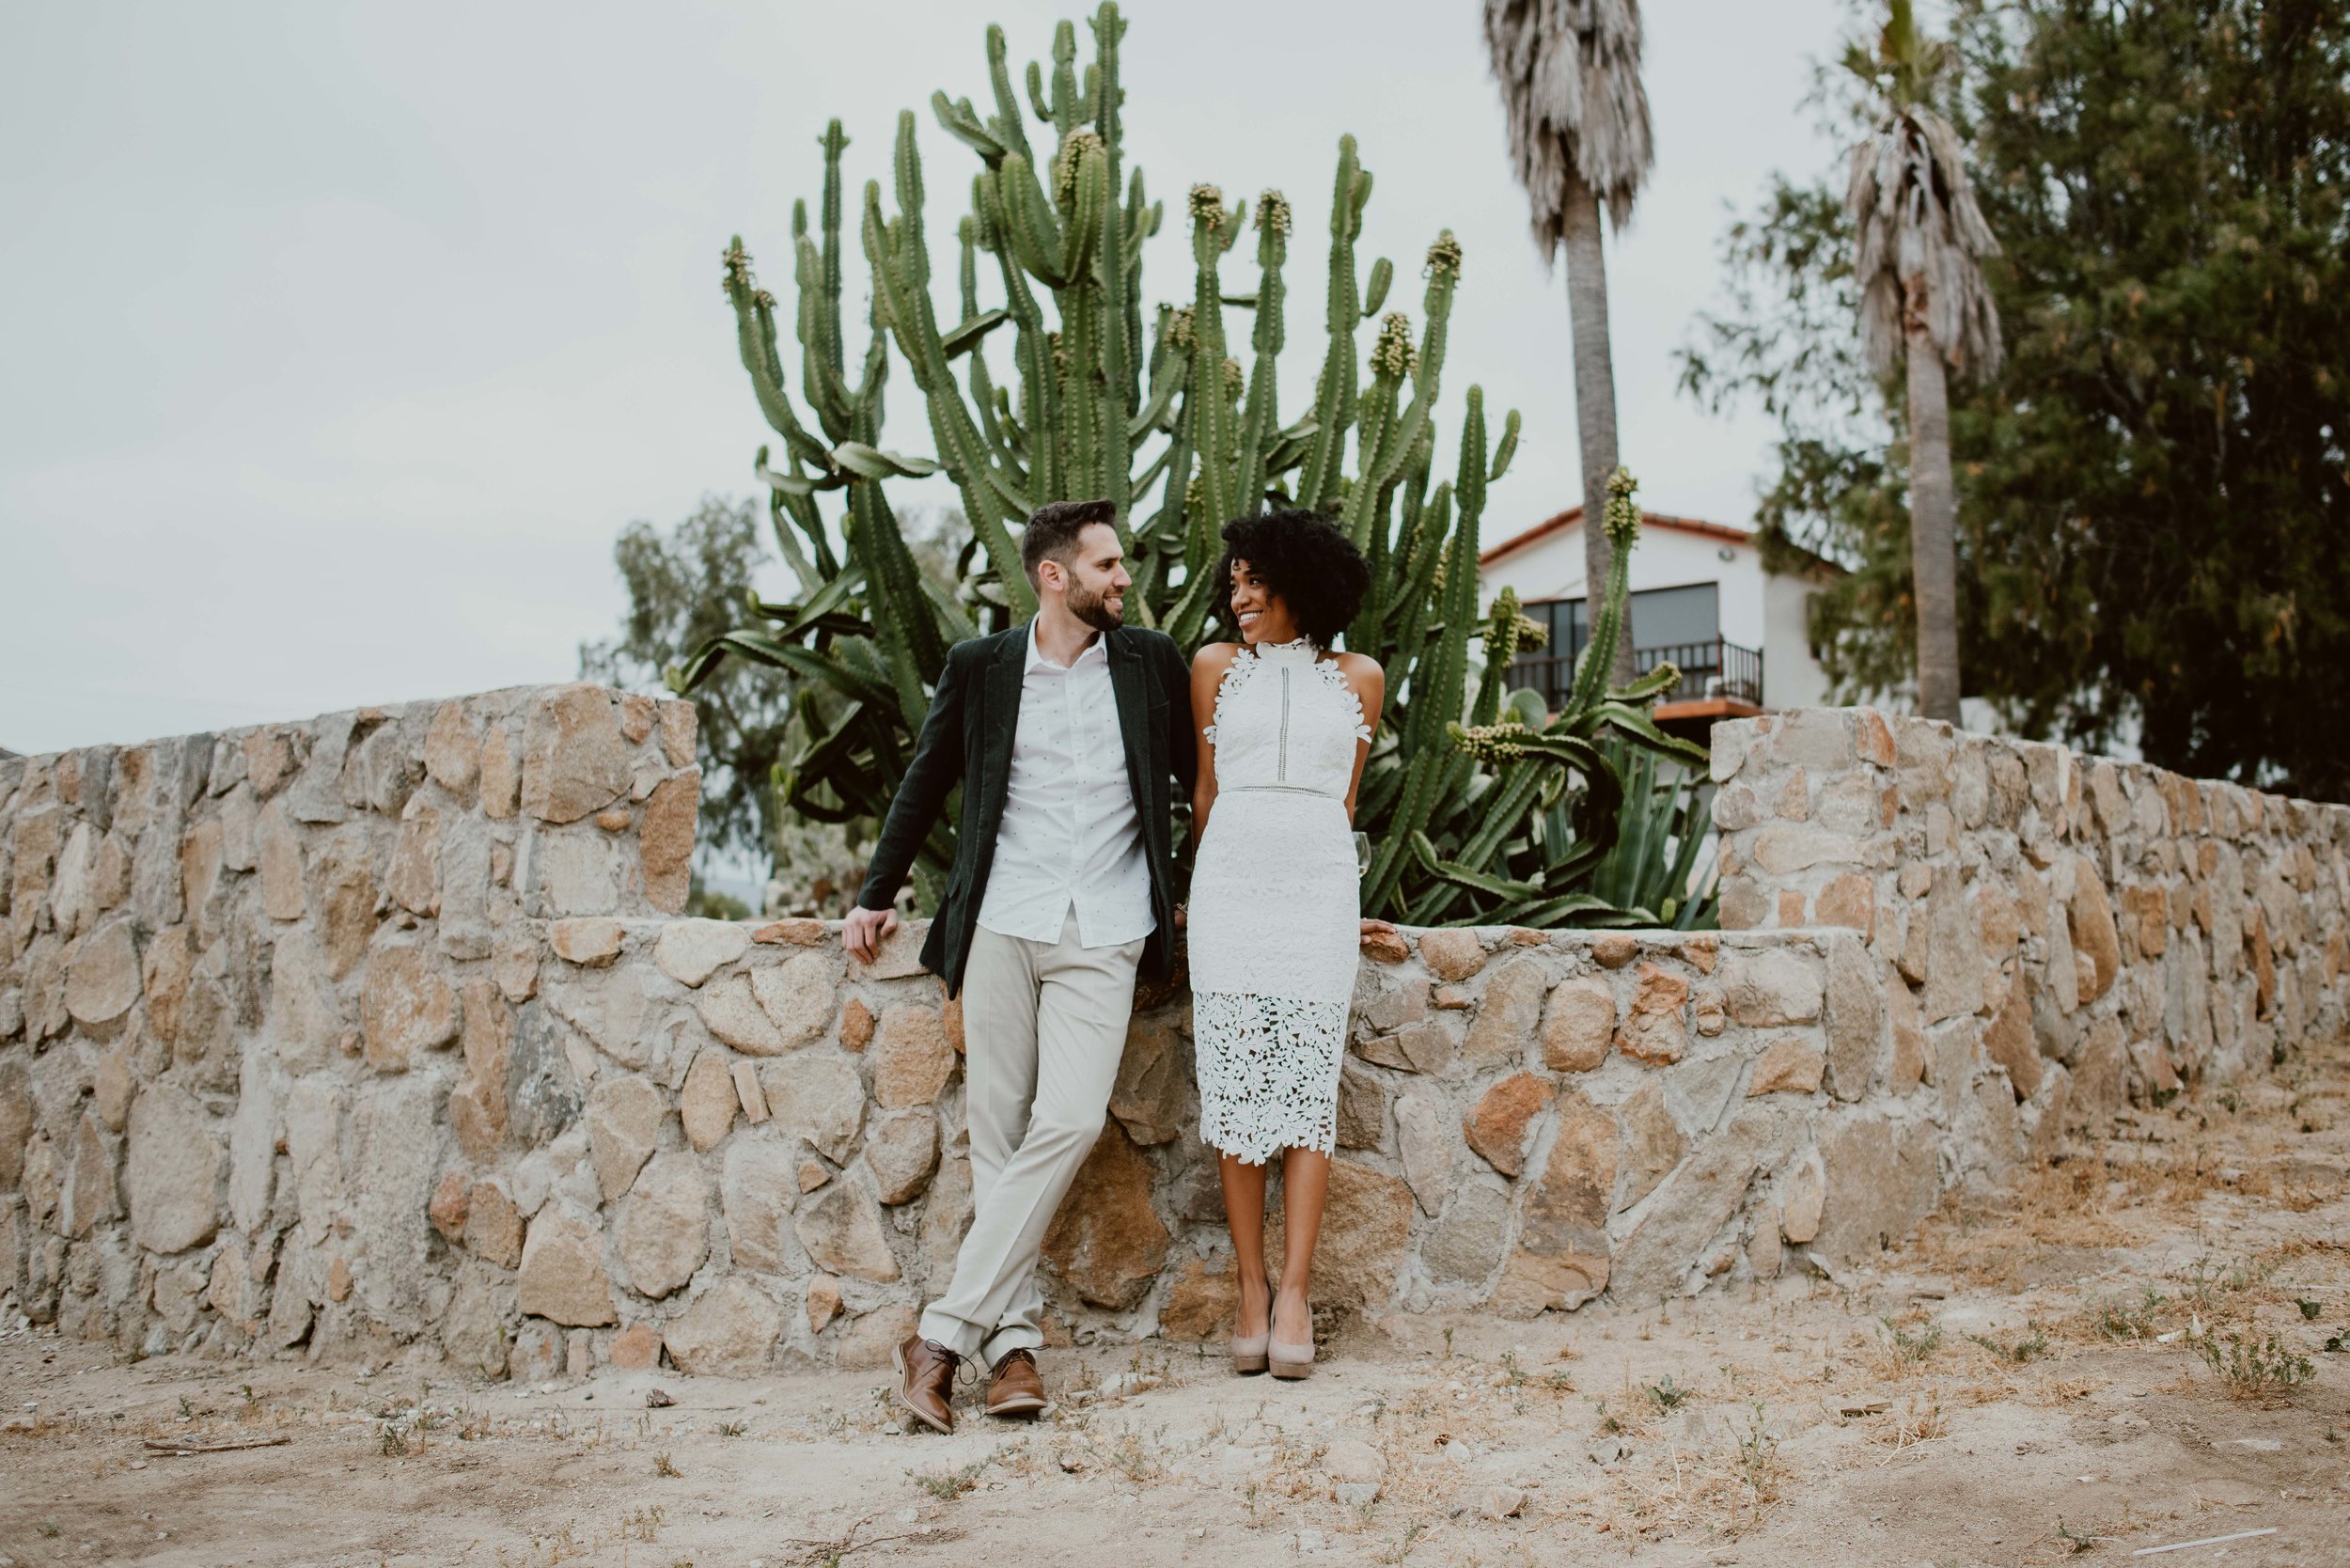 Nathalie+Carlin | Engagement at Valle de Guadalupe Mexico | Valle de  Guadalupe Wedding Photographer | Ensenada Wedding Photographer | Valle de  Guadalupe Wedding — Cabo Wedding Photographer | Destination Wedding  Photographer